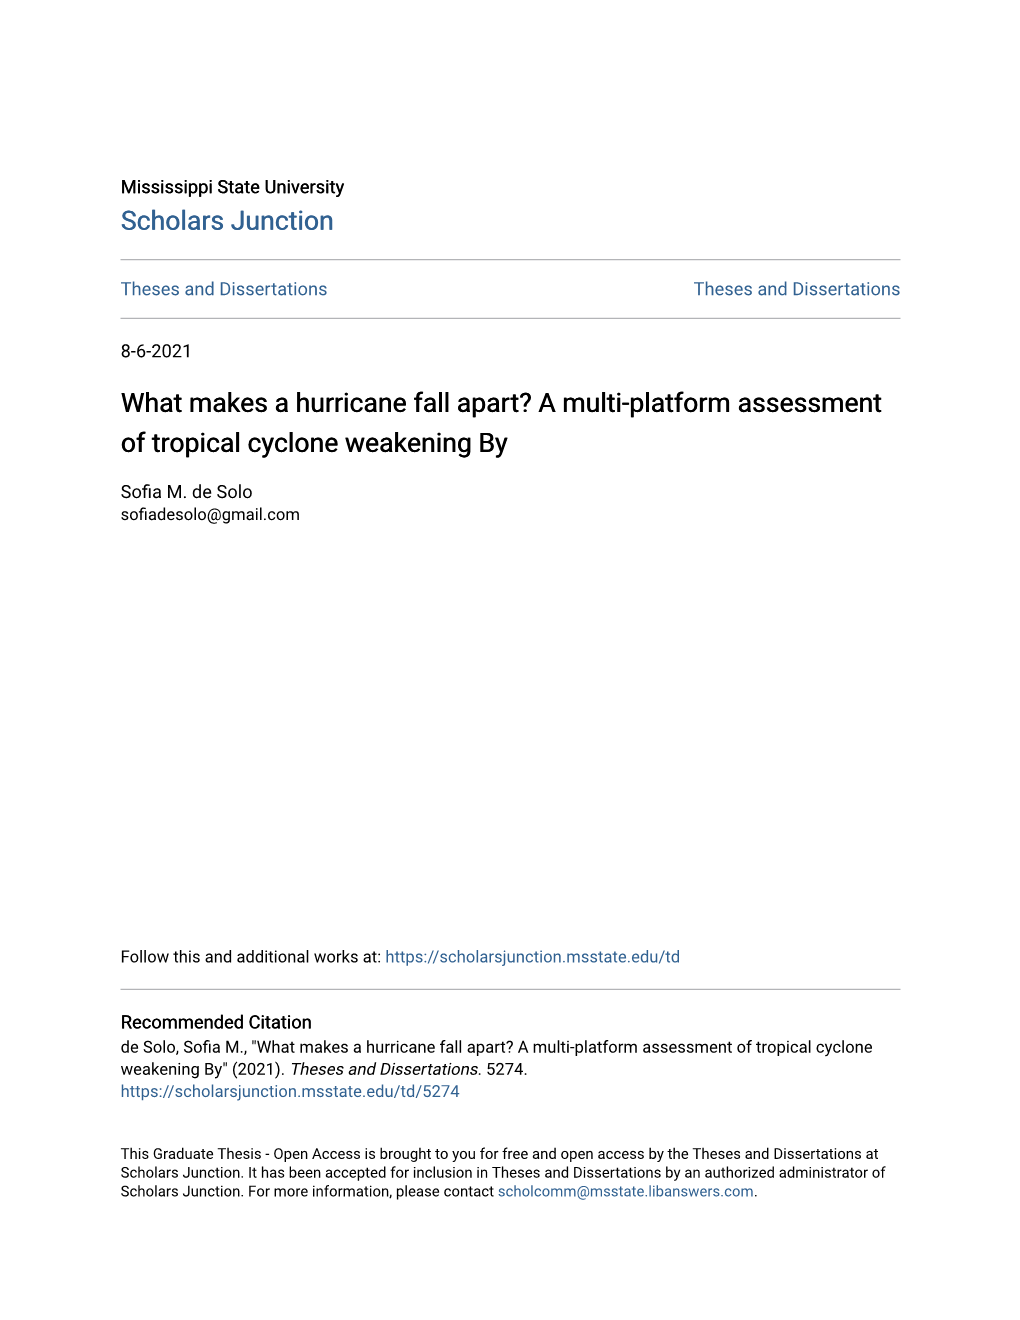 What Makes a Hurricane Fall Apart? a Multi-Platform Assessment of Tropical Cyclone Weakening By